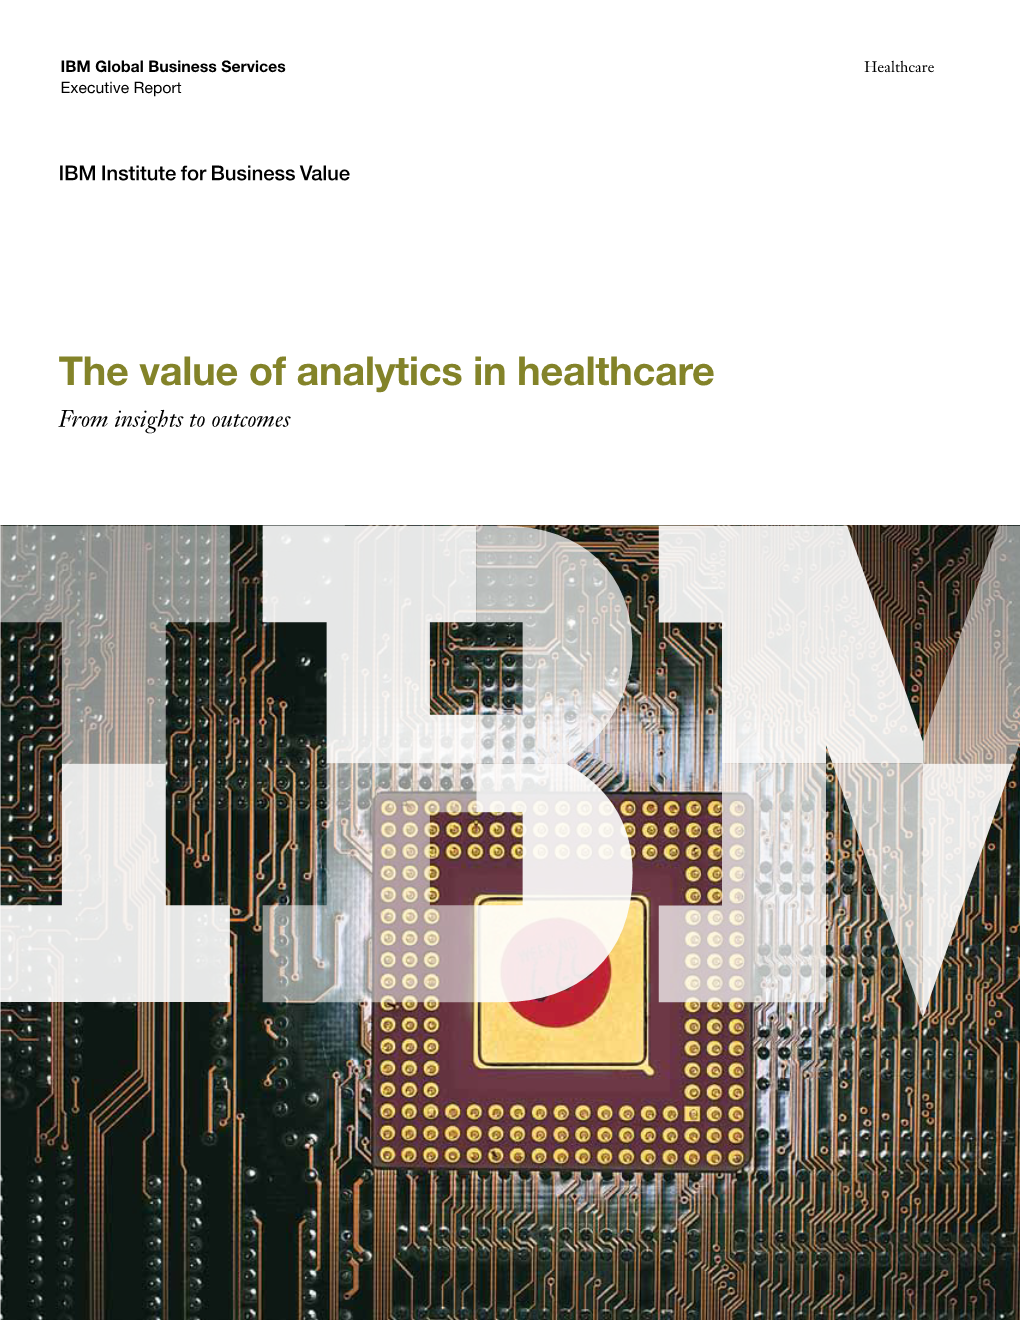 The Value of Analytics in Healthcare